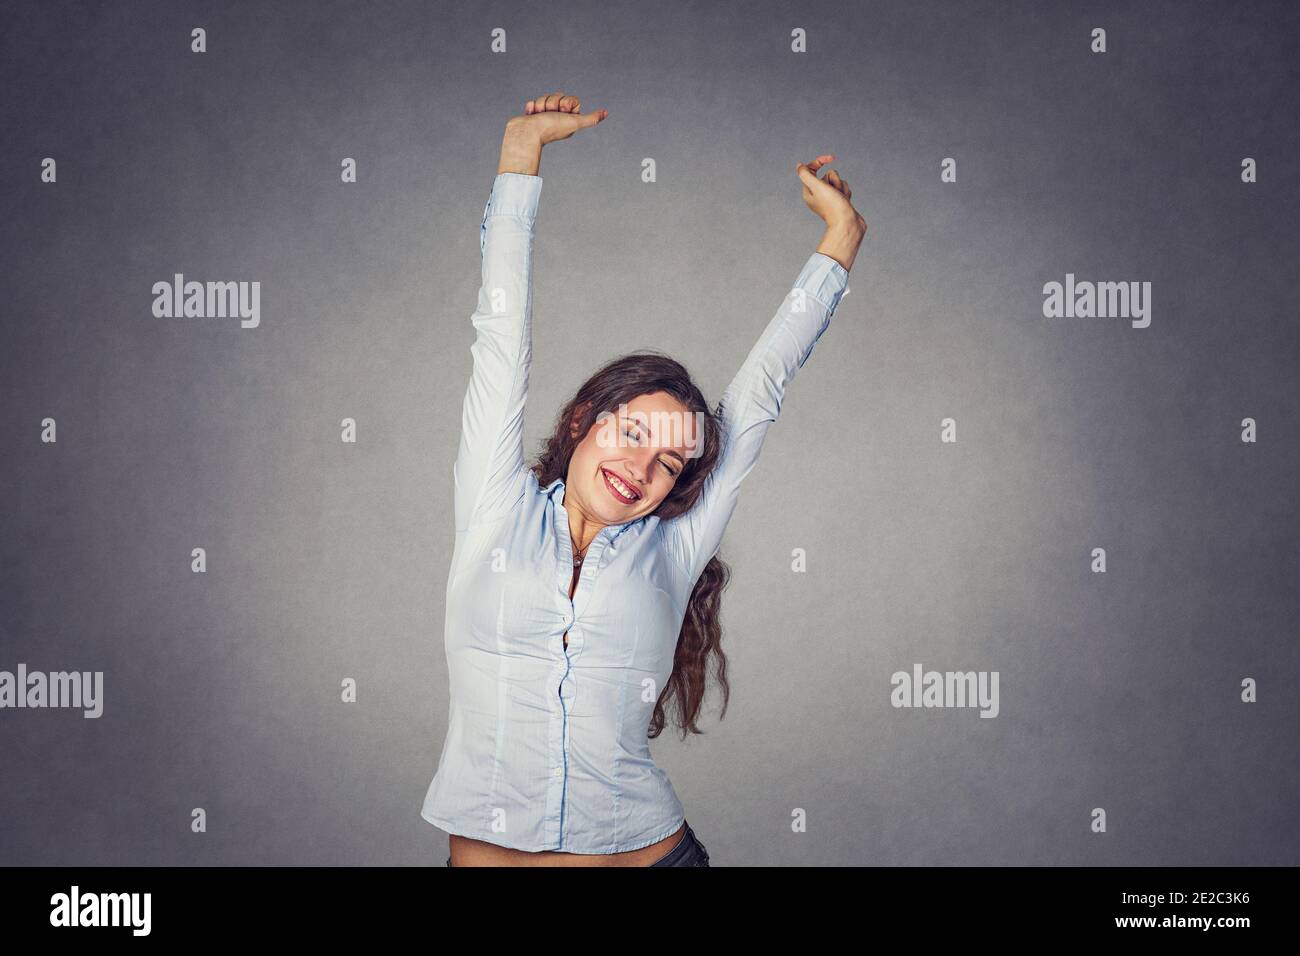 Happy smiling young woman stretching her arms wearing formal blue shirt stretching isolated on gray background. Stock Photo